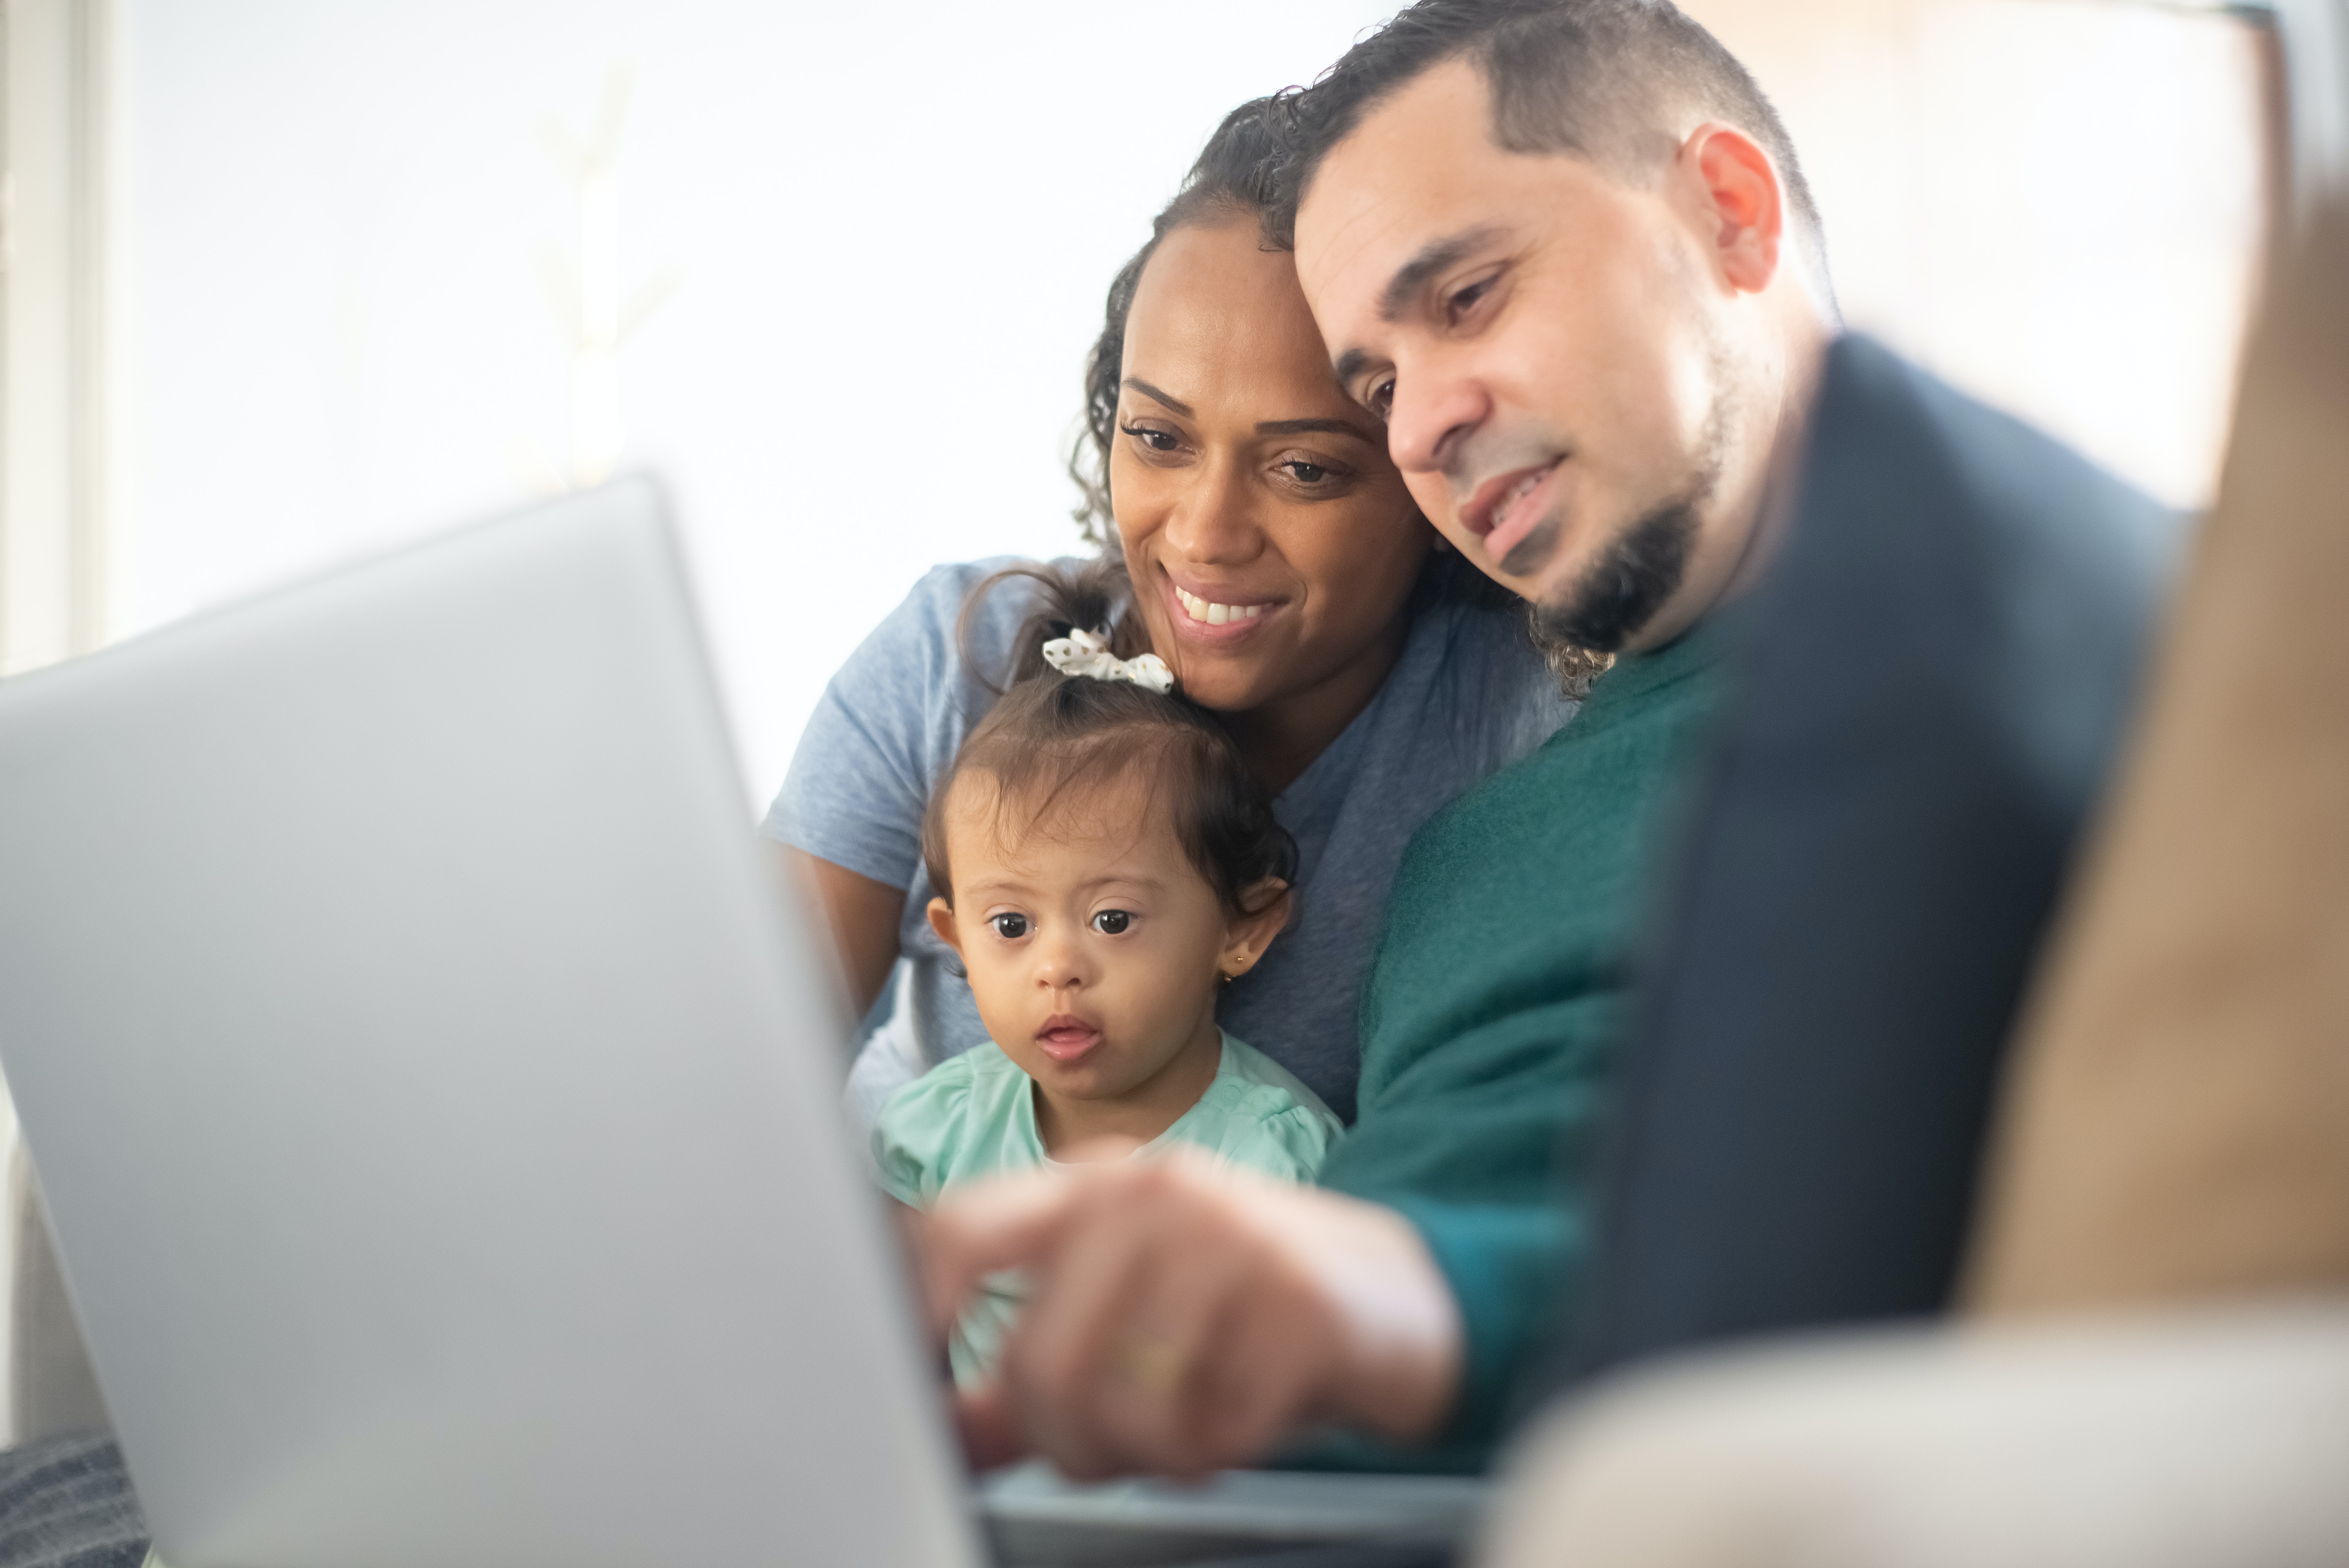 A family is pictured learning together on a laptop. A Black mother in her 30’s holds her daughter in her lap. Her young daughter, who has Down Syndrome, looks to be around the age of two and she is looking closely at the computer. A Latino father in his 30’s is pointing to the screen to show his wife and daughter something.